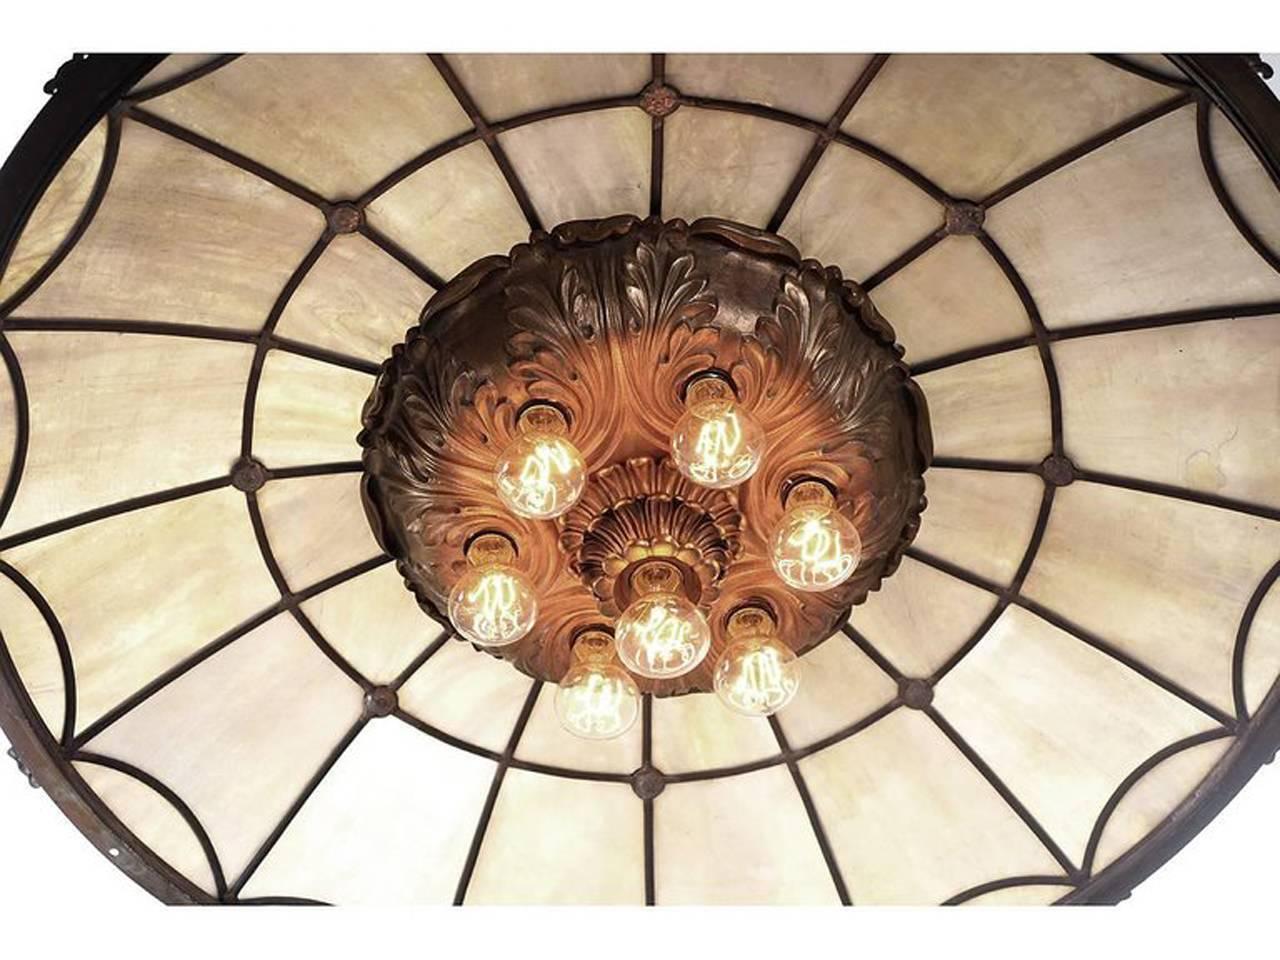 This is as elegant as it gets. The layered casting has seven bulbs and is heavy bronze. The skylight style domed shade is almost 3 foot in diameter with a cream/amber leaded glass and cast bronze details. The quality looks as if it was created by an